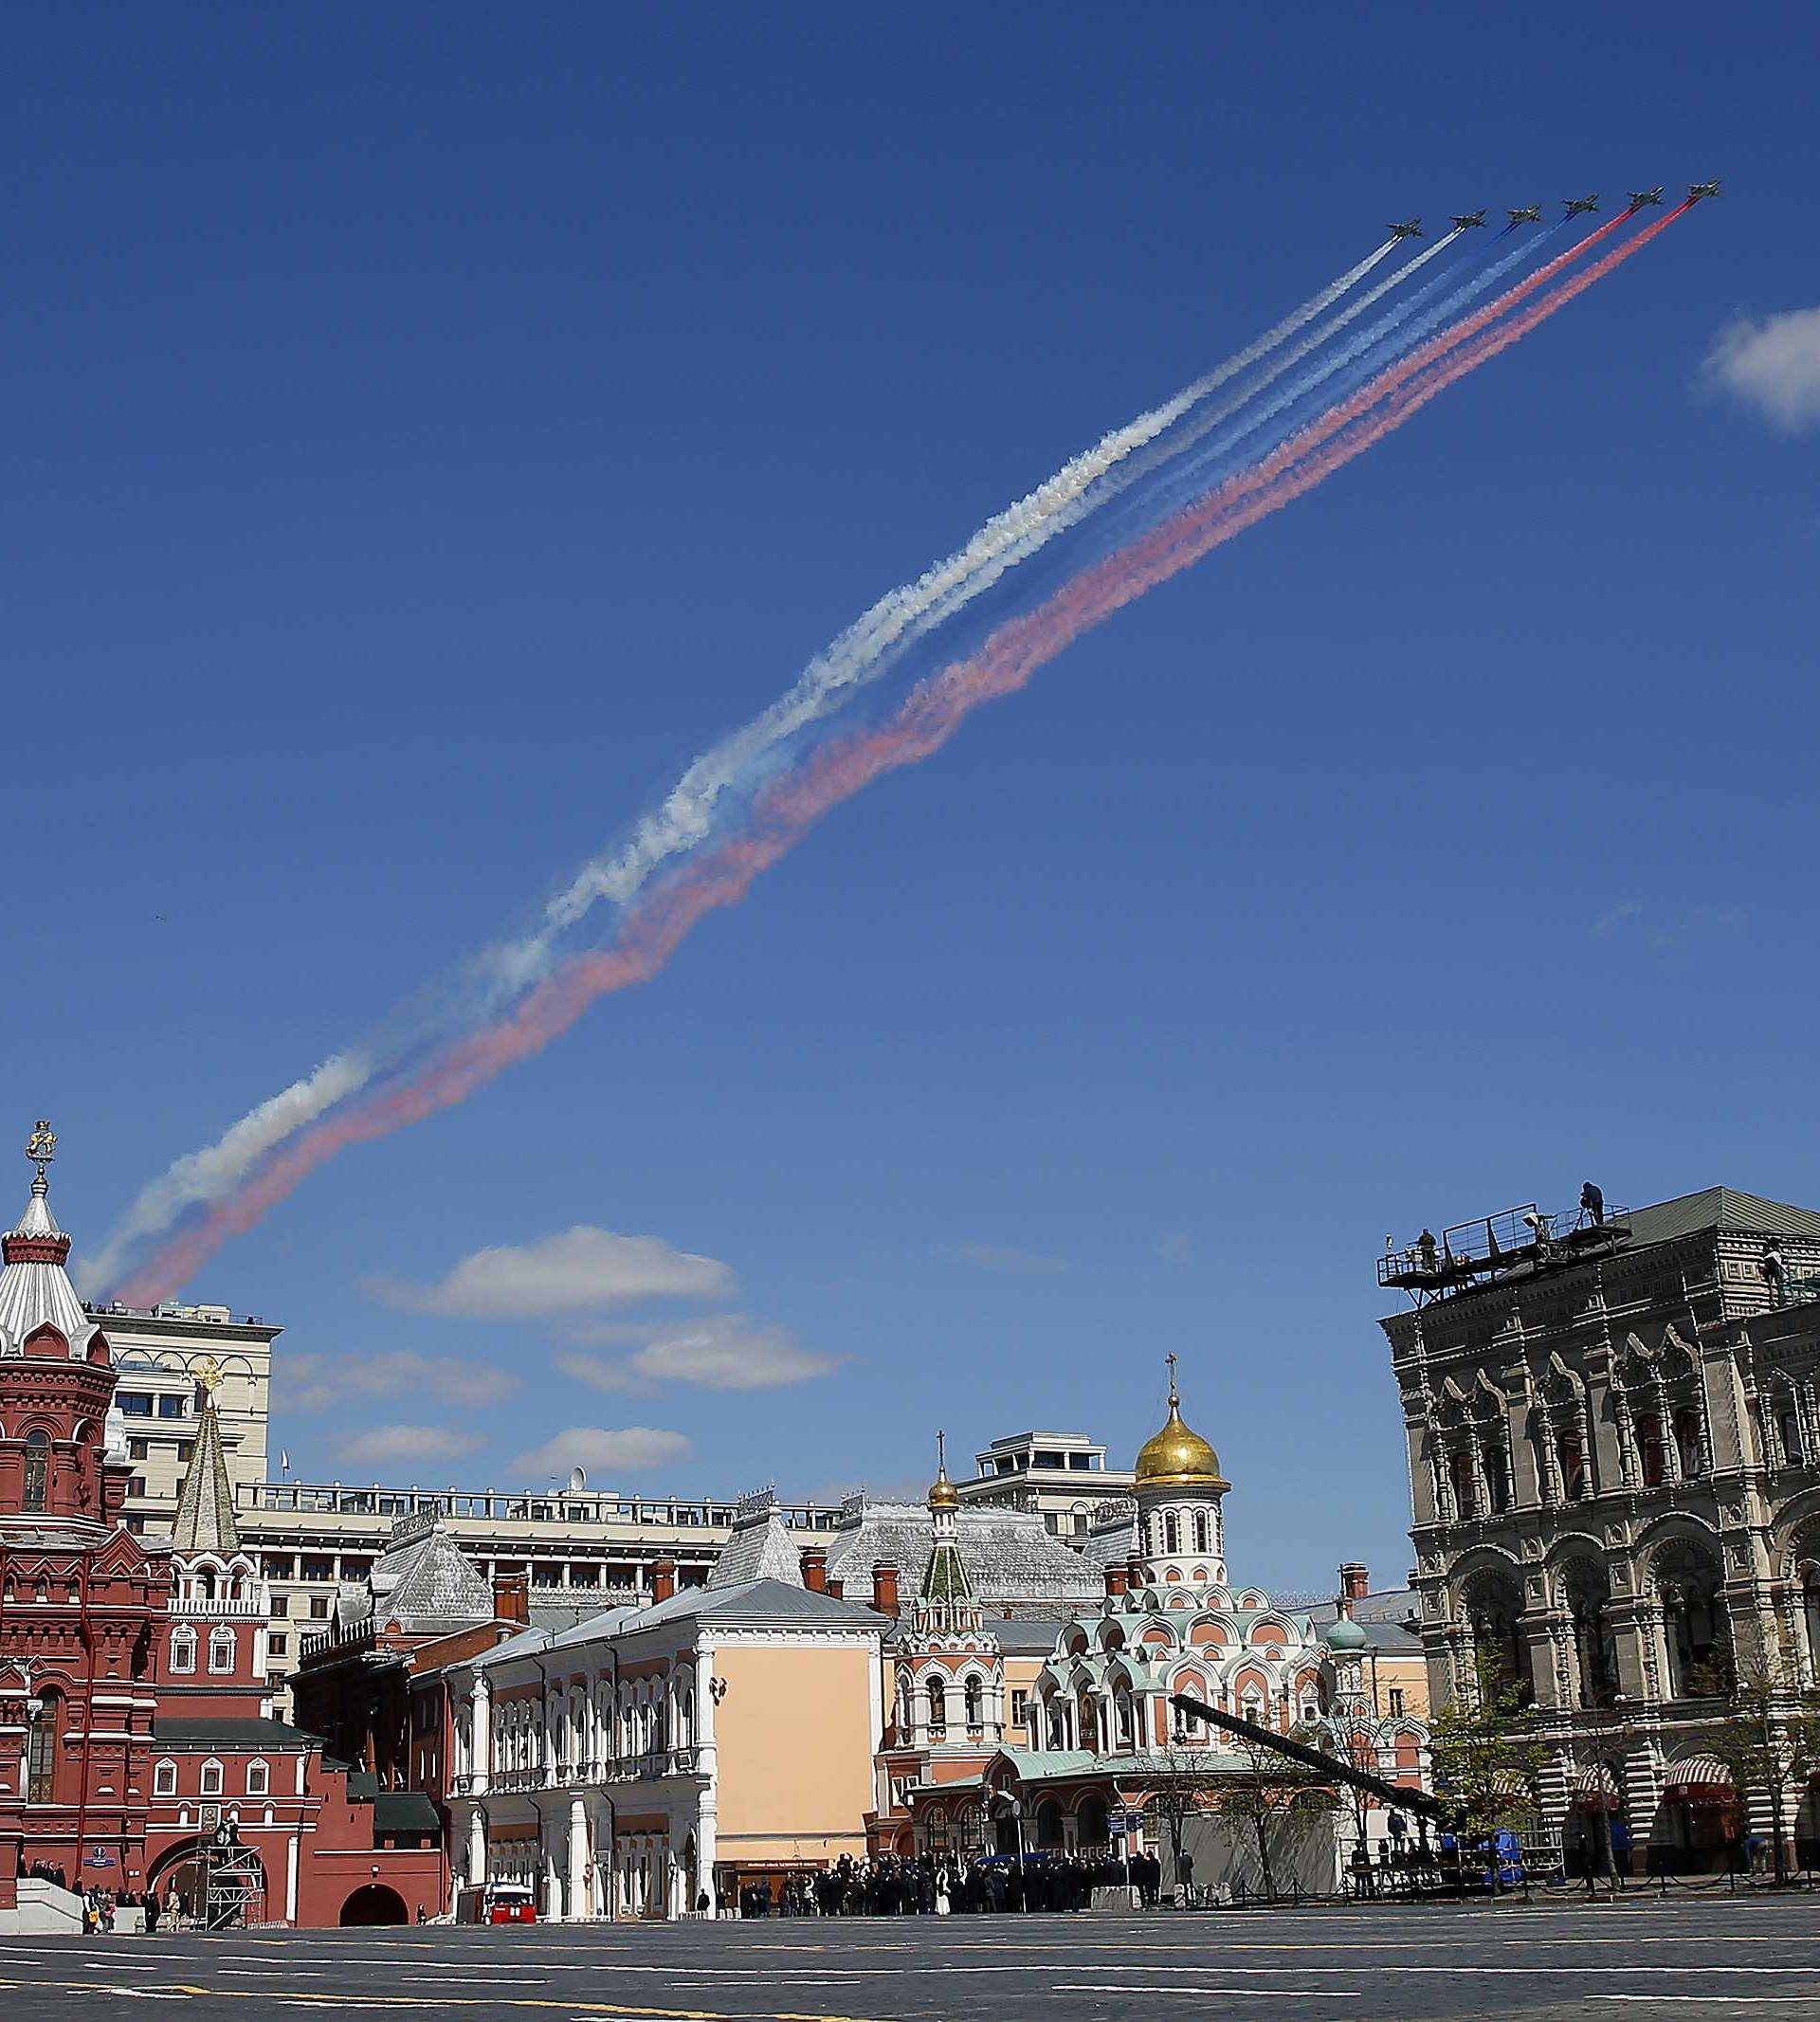 Russian army rehearse before the World War II anniversary in Moscow